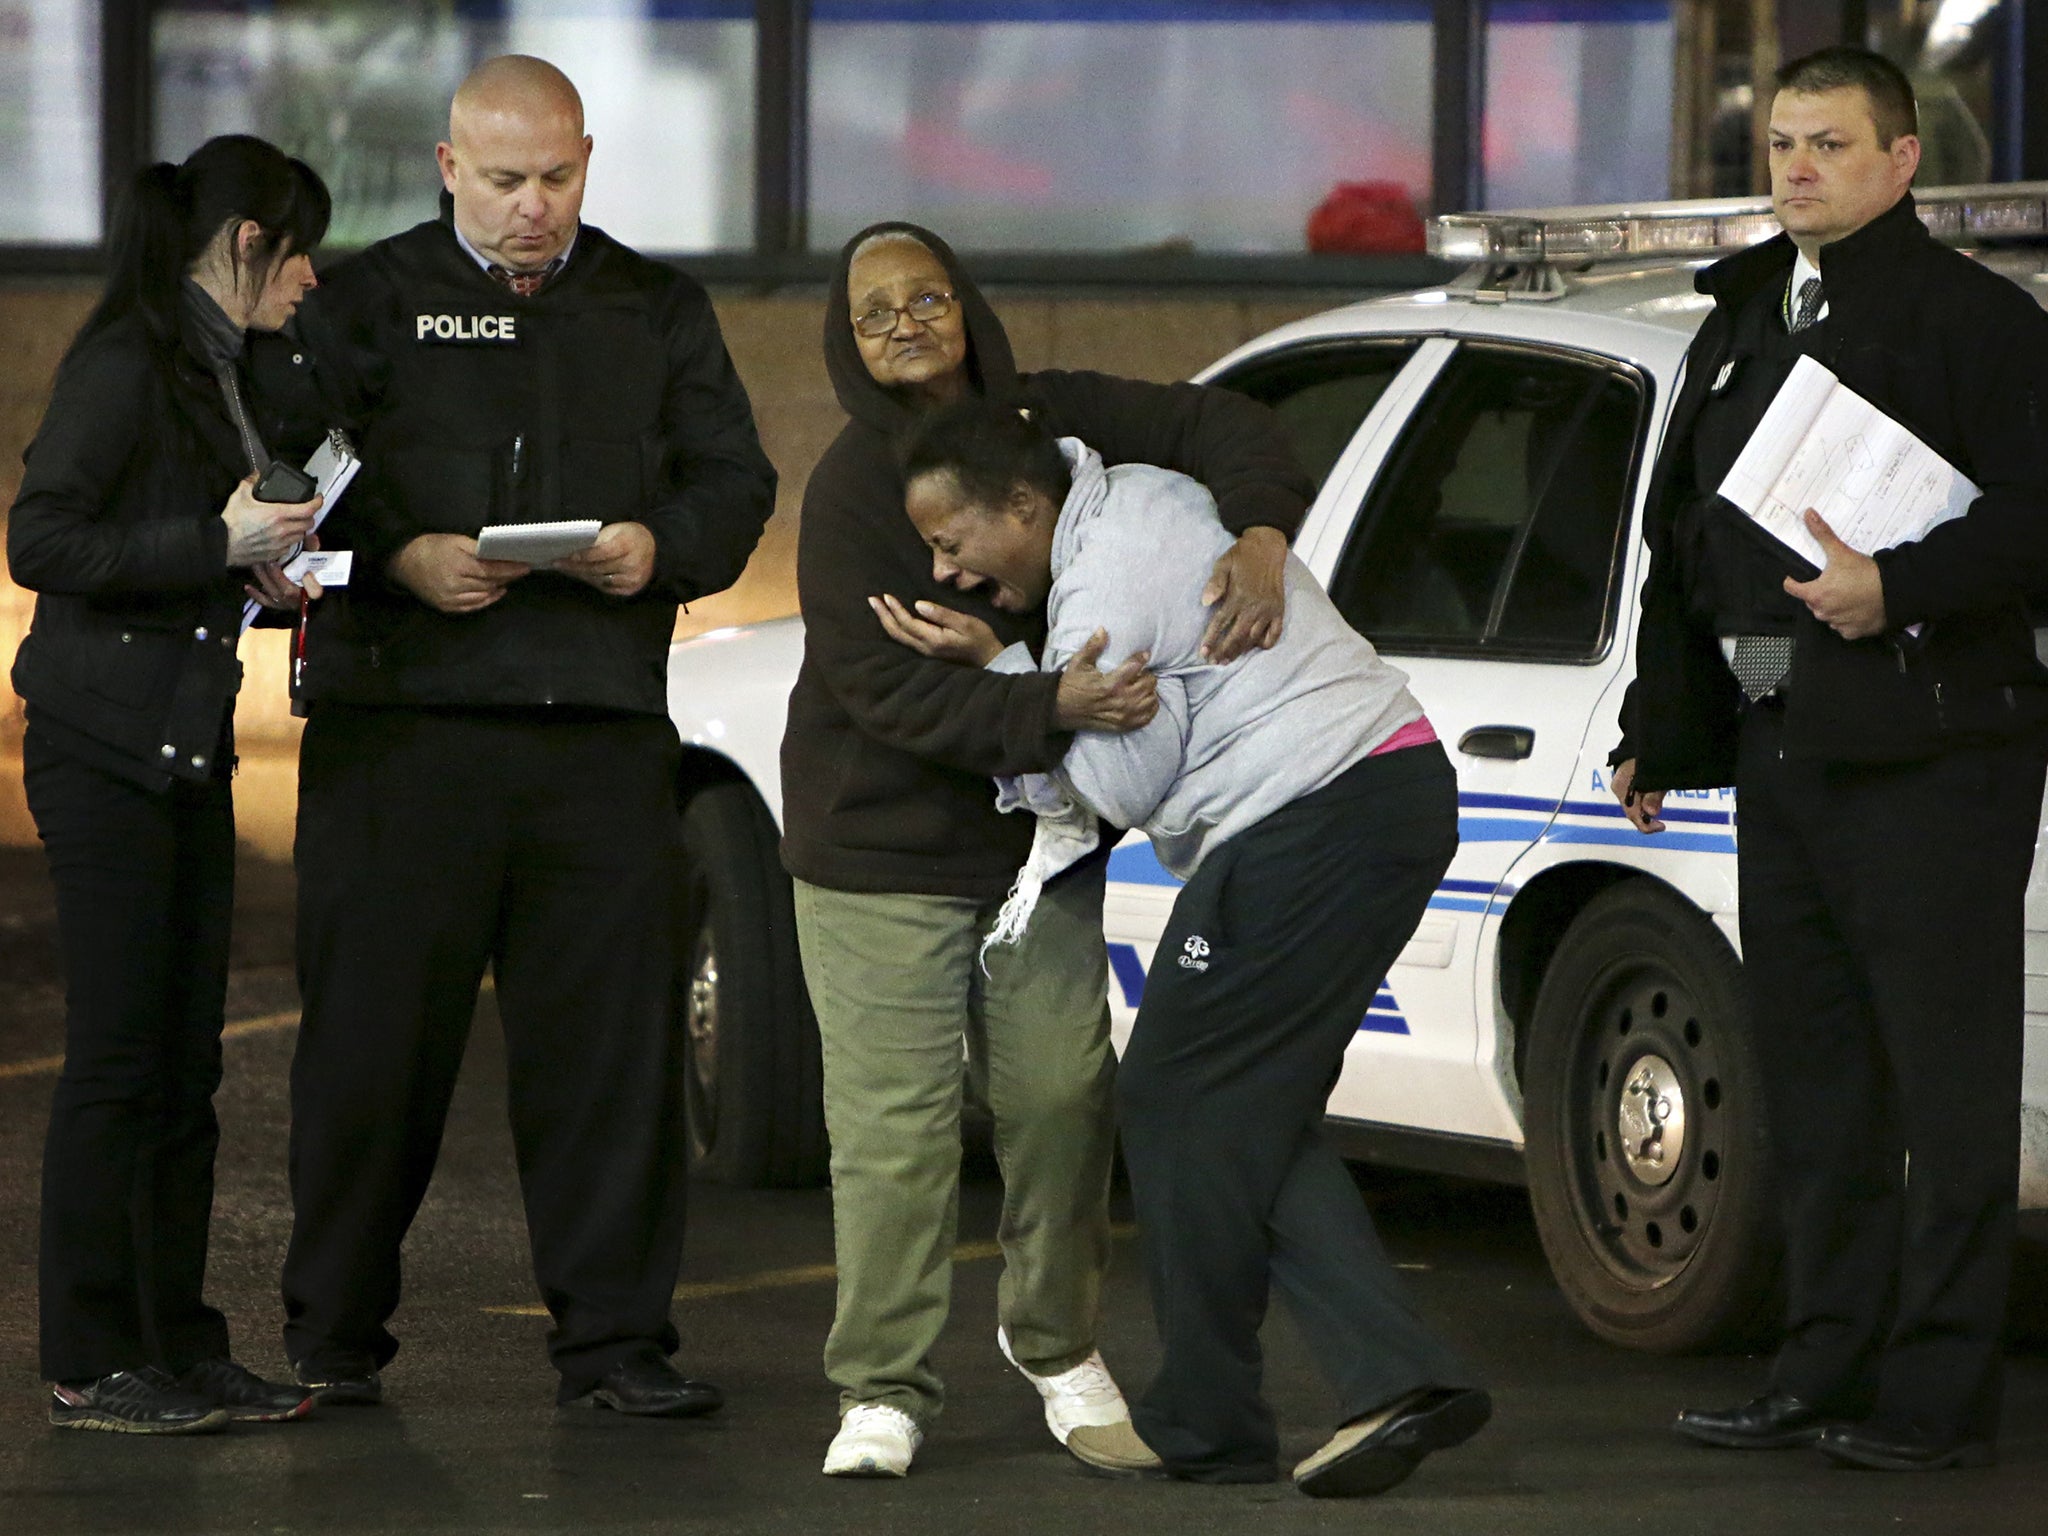 Toni Martin, front center, cries out as she talks to the police at the scene where she says her son was fatally shot